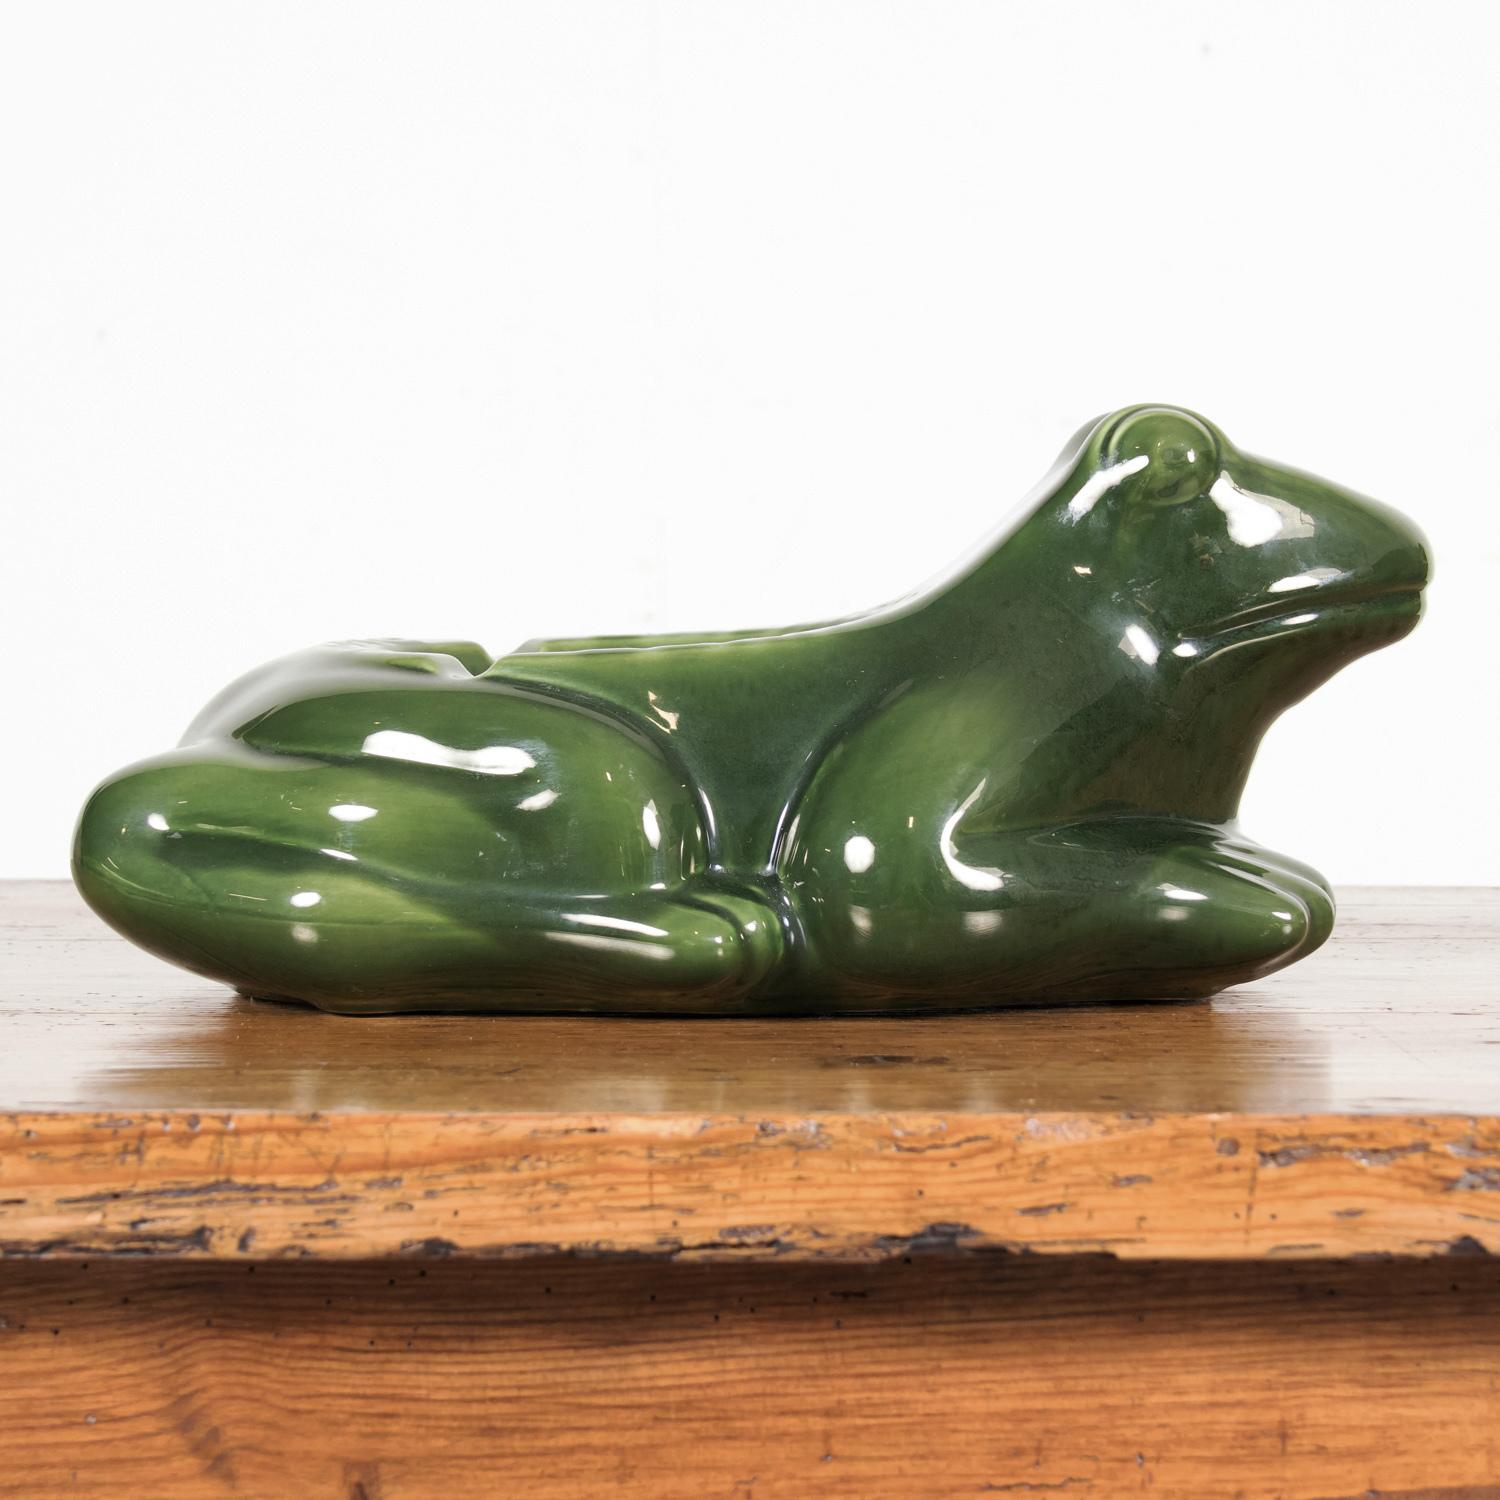 Large Vintage French L'HERITIER GUYOT DIJON Green Ceramic Frog Ad Ashtray In Good Condition For Sale In Birmingham, AL